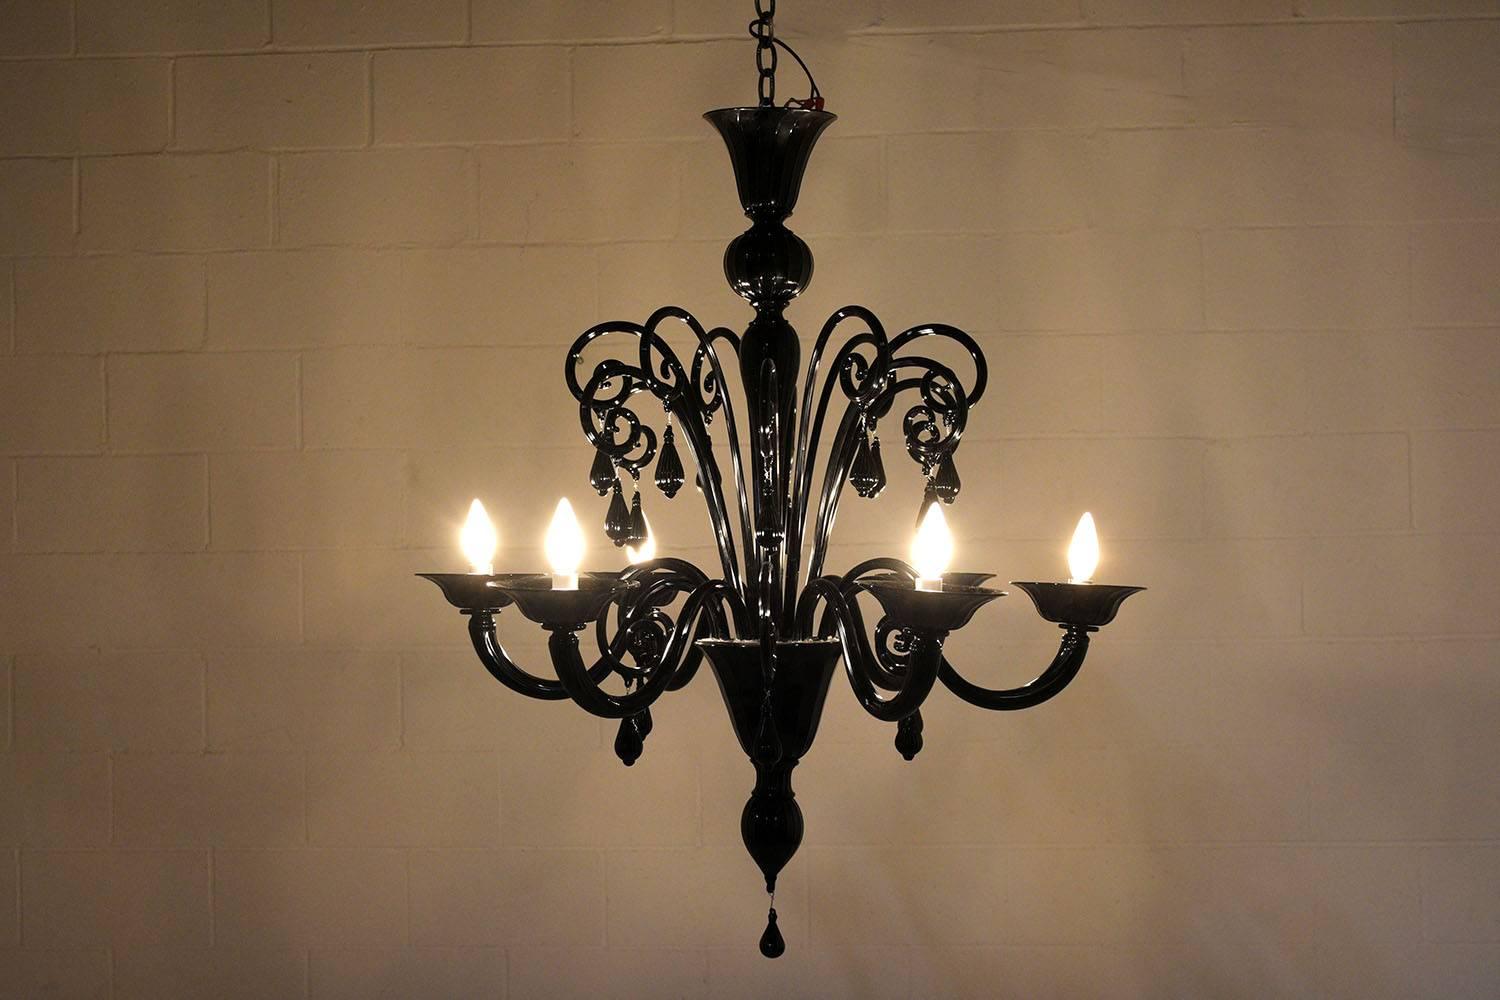 This Vintage Italian Six-Arm Chandelier features a Murano glass body finished in a striking black color and the glass is accented with fluted details. The piece features blow glass shaped into scrolls with curved arms and hanging from the top,